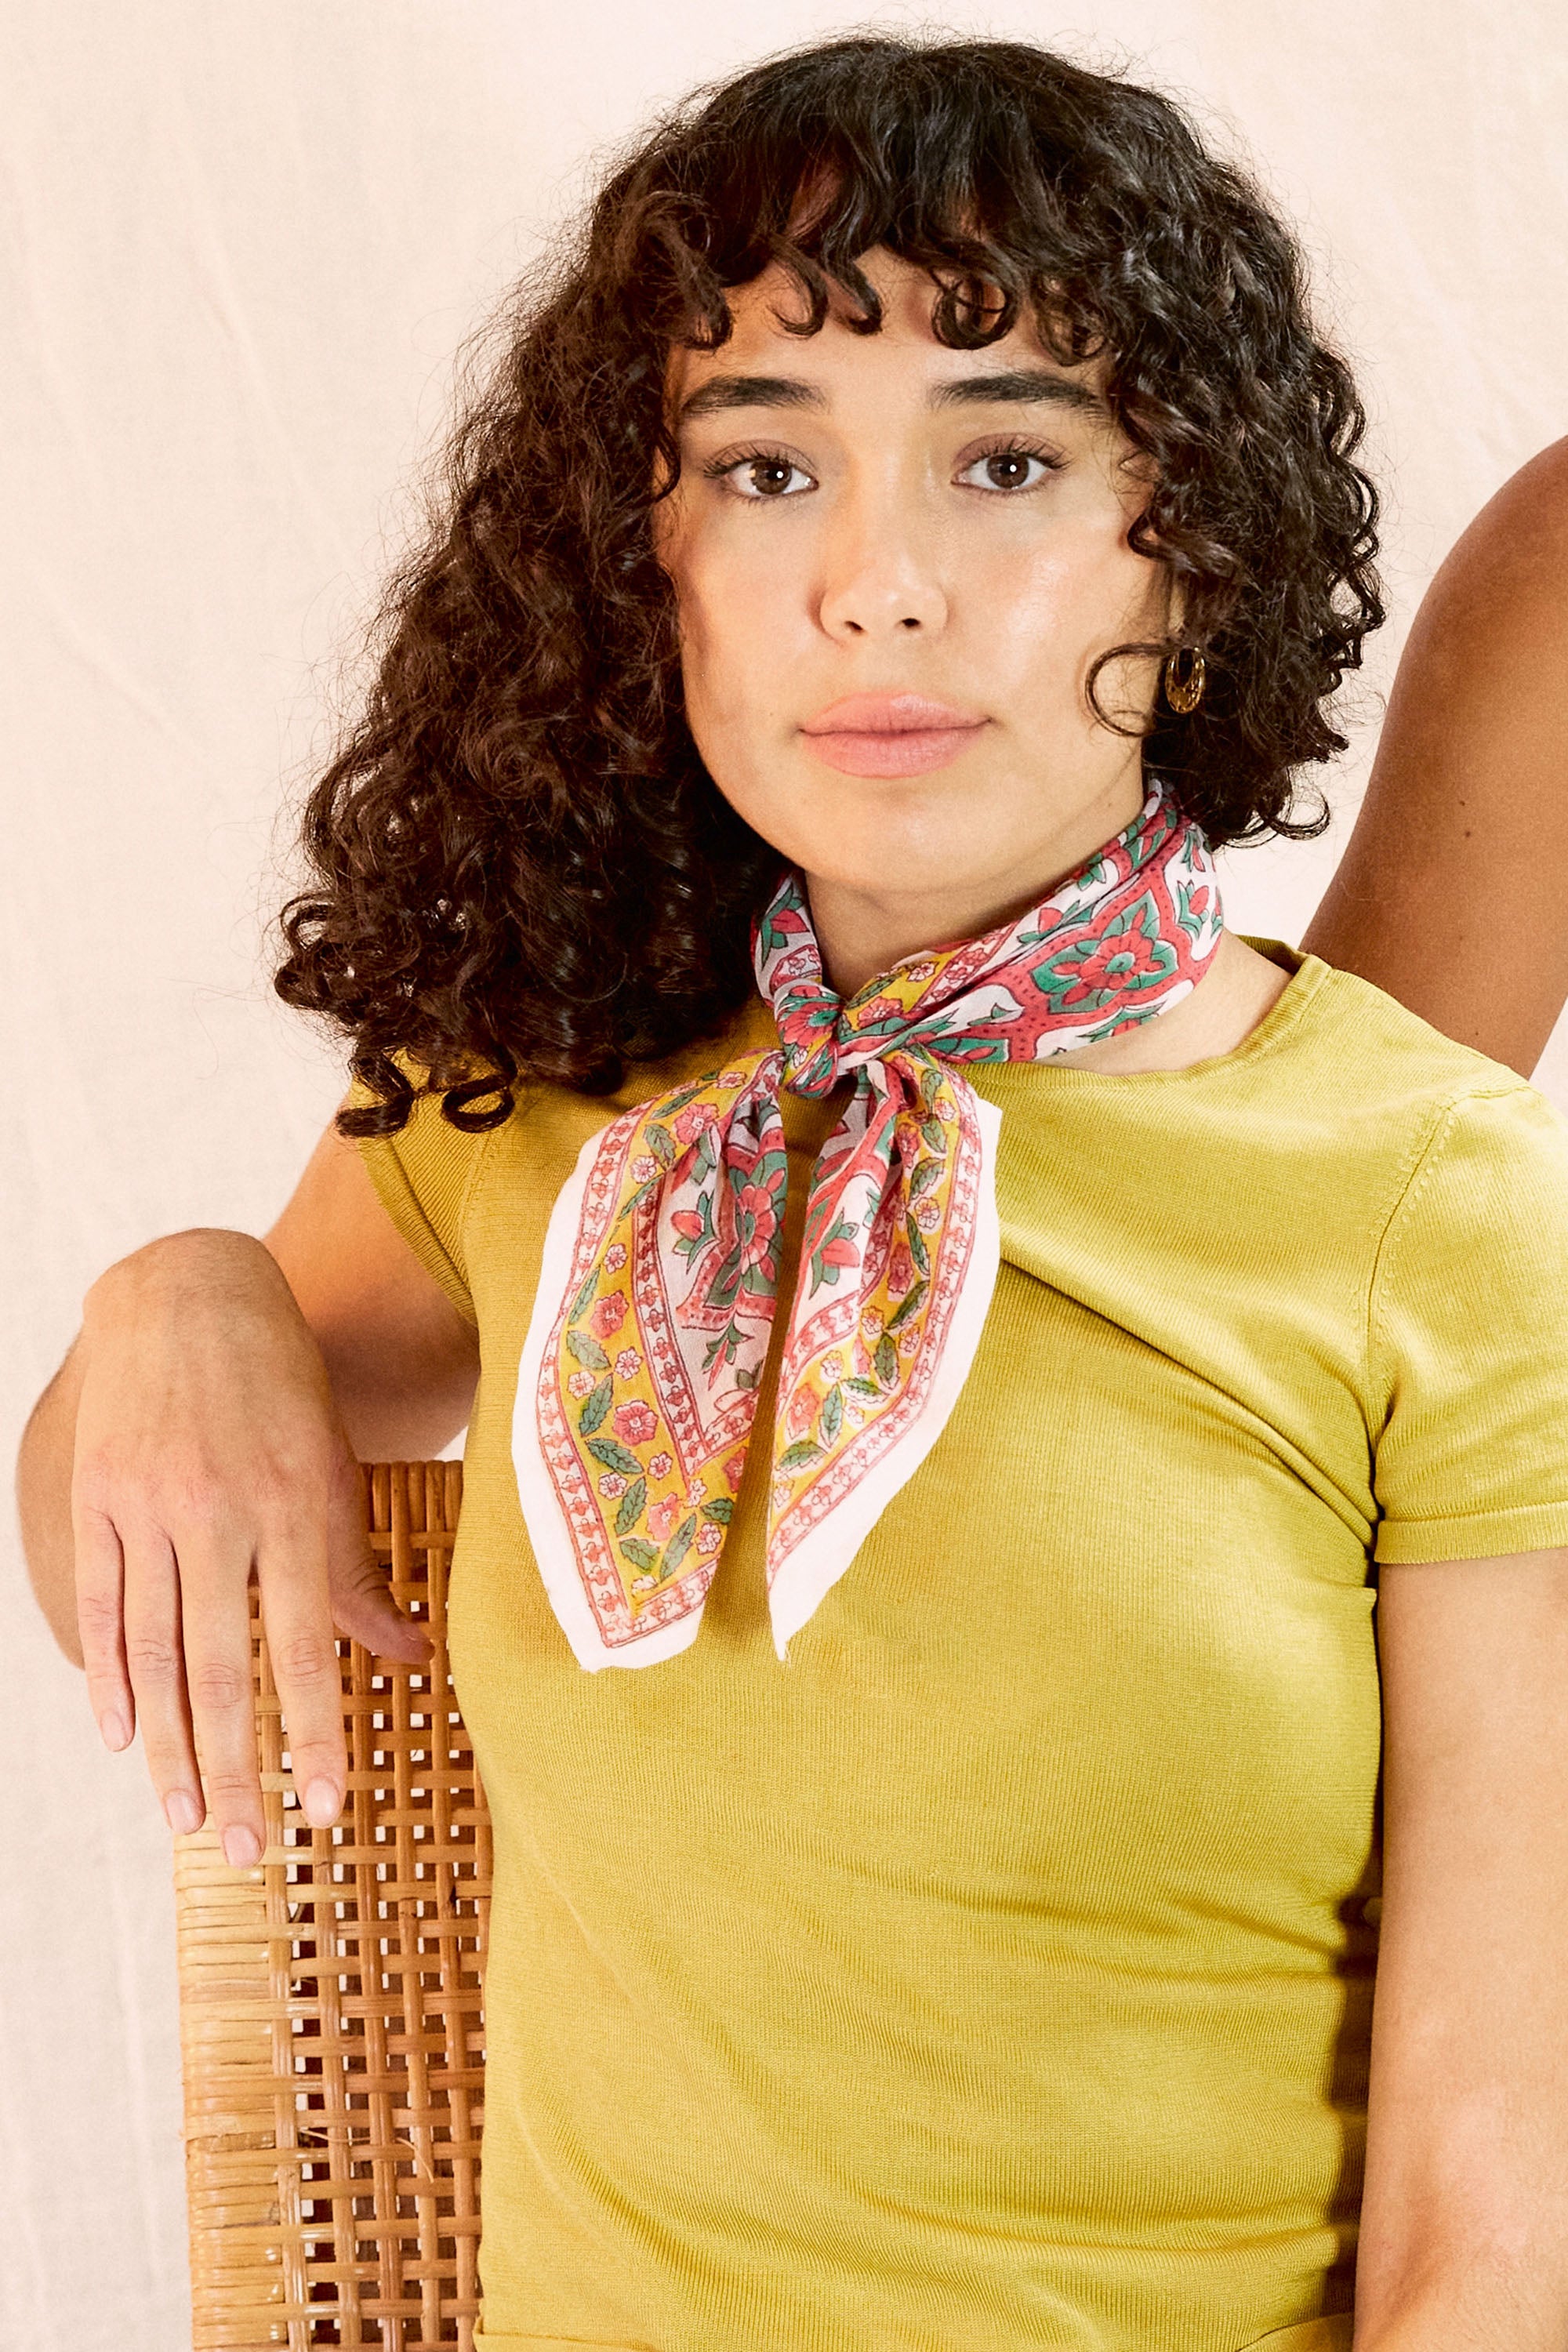 Model wearing the Zoe bandana tied around her neck, against a creamish background